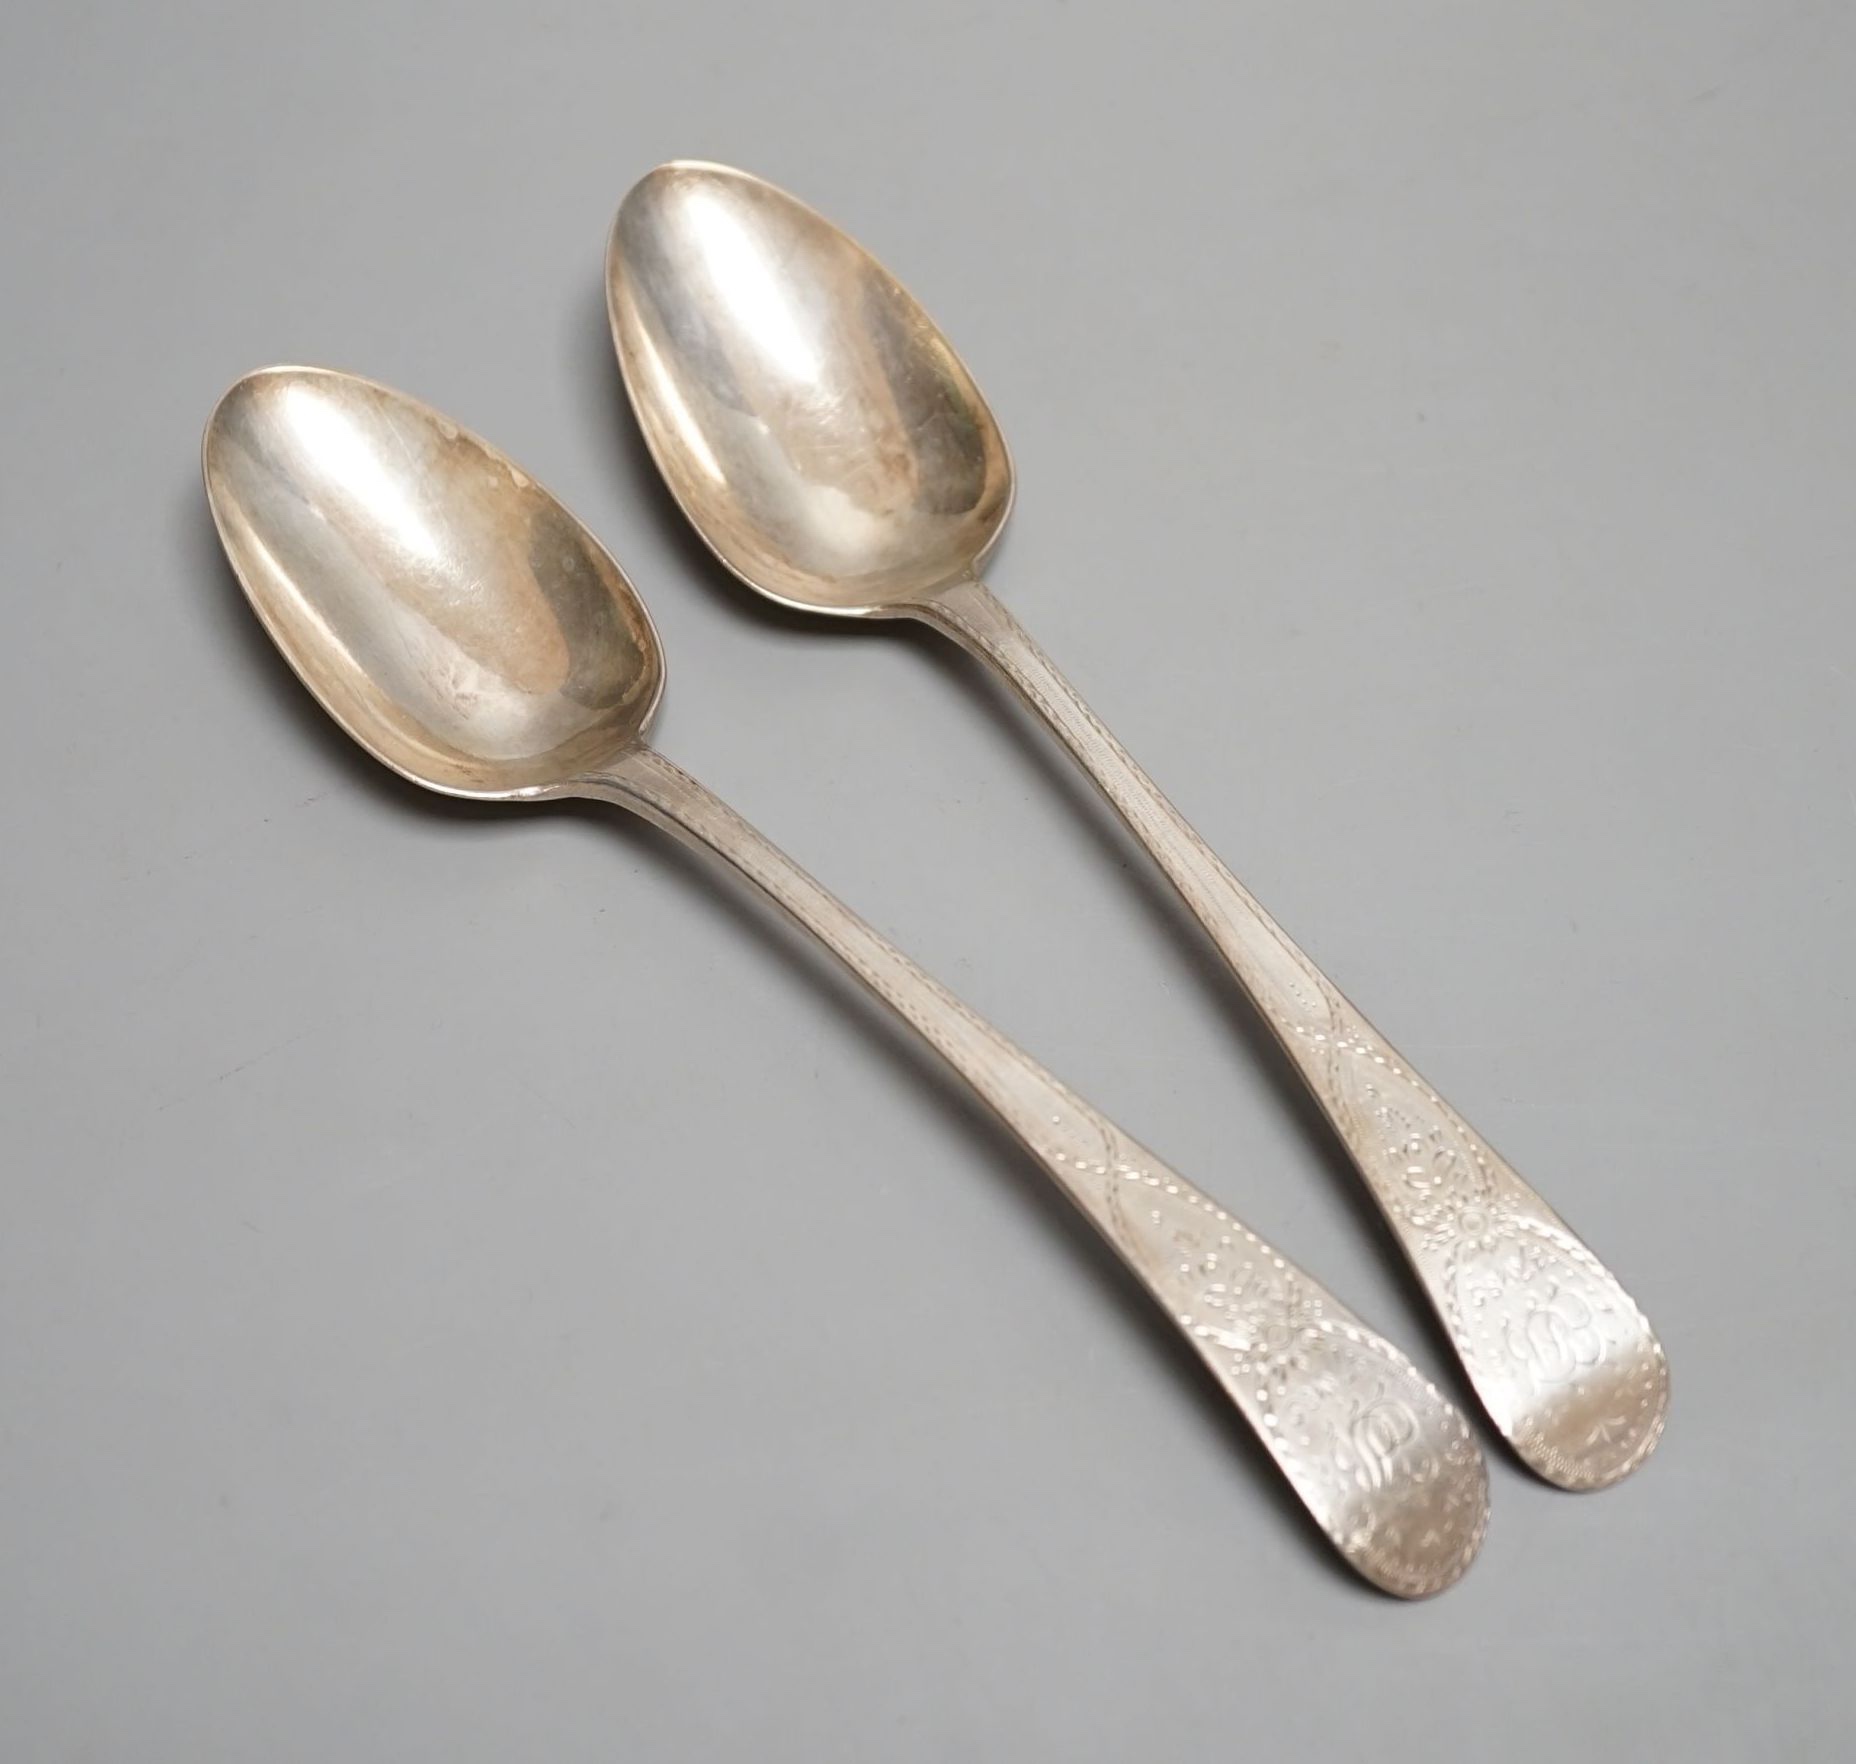 A pair of George III silver Old English spoons, with bright cut engraving, William Sumner, London, 1784